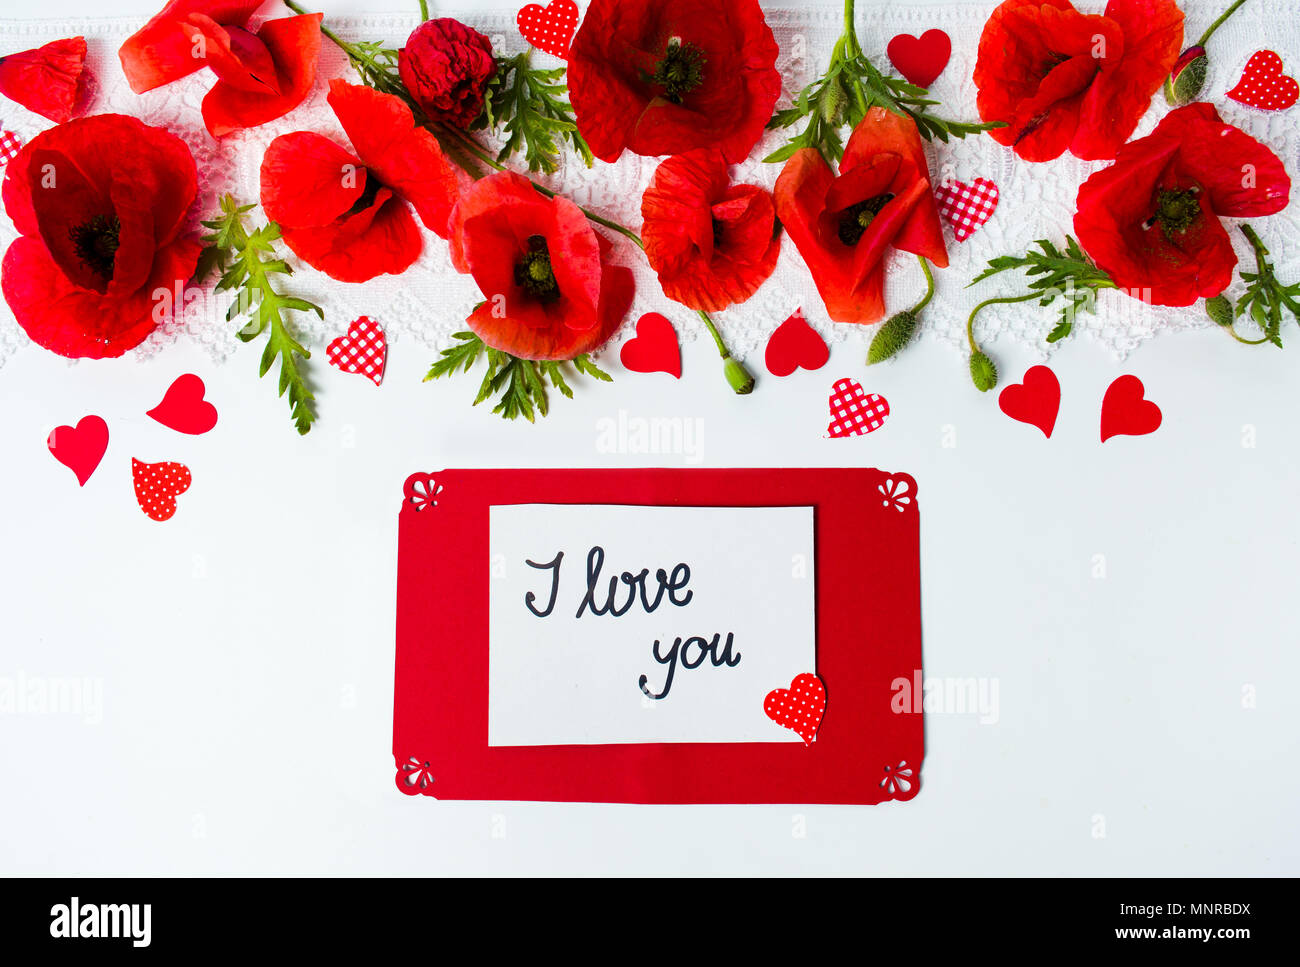 I love you card with poppy flowers on white background Stock Photo